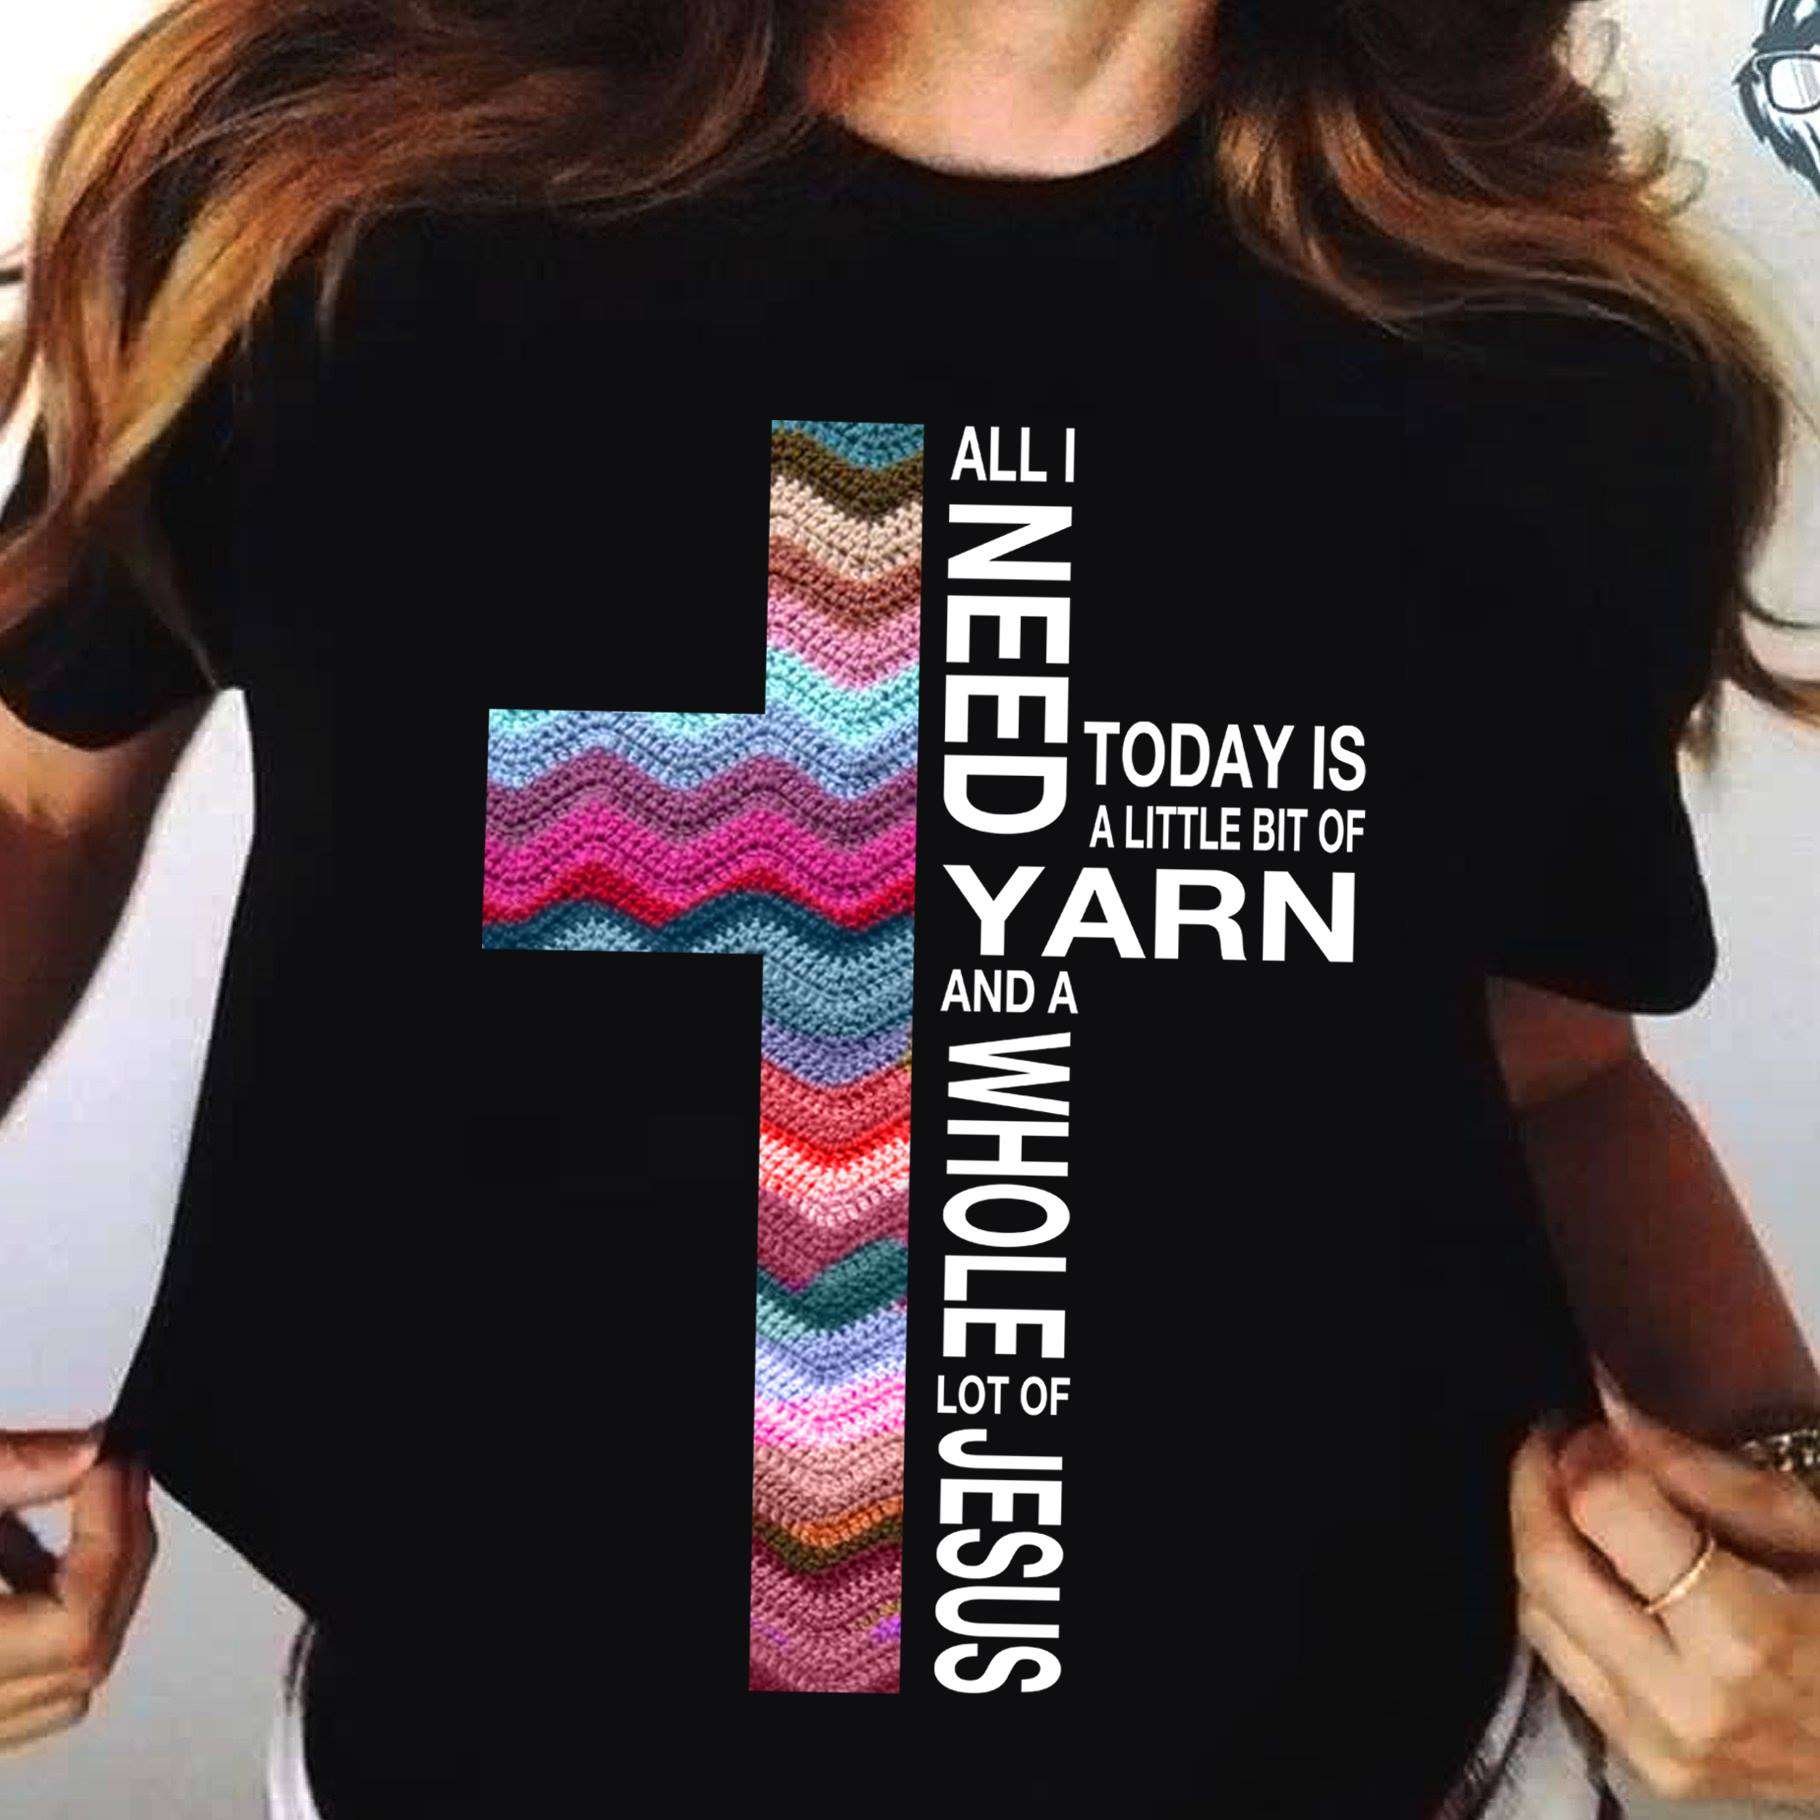 All I need today is a little bit of yarn and a whole lot of Jesus - Jesus the god